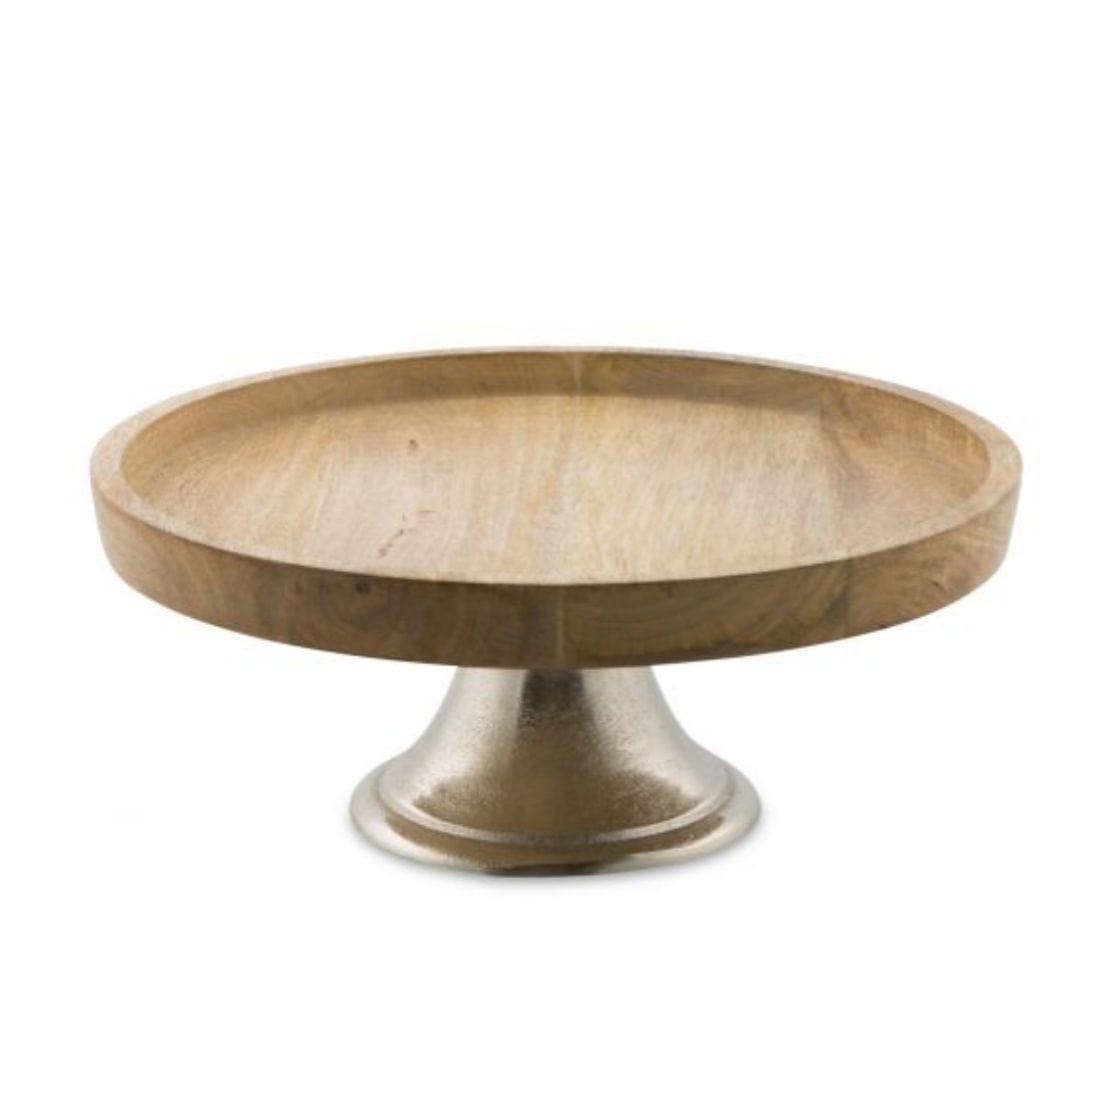 Pinda Wooden Cake Stand with Aluminium Foot House of Dudley